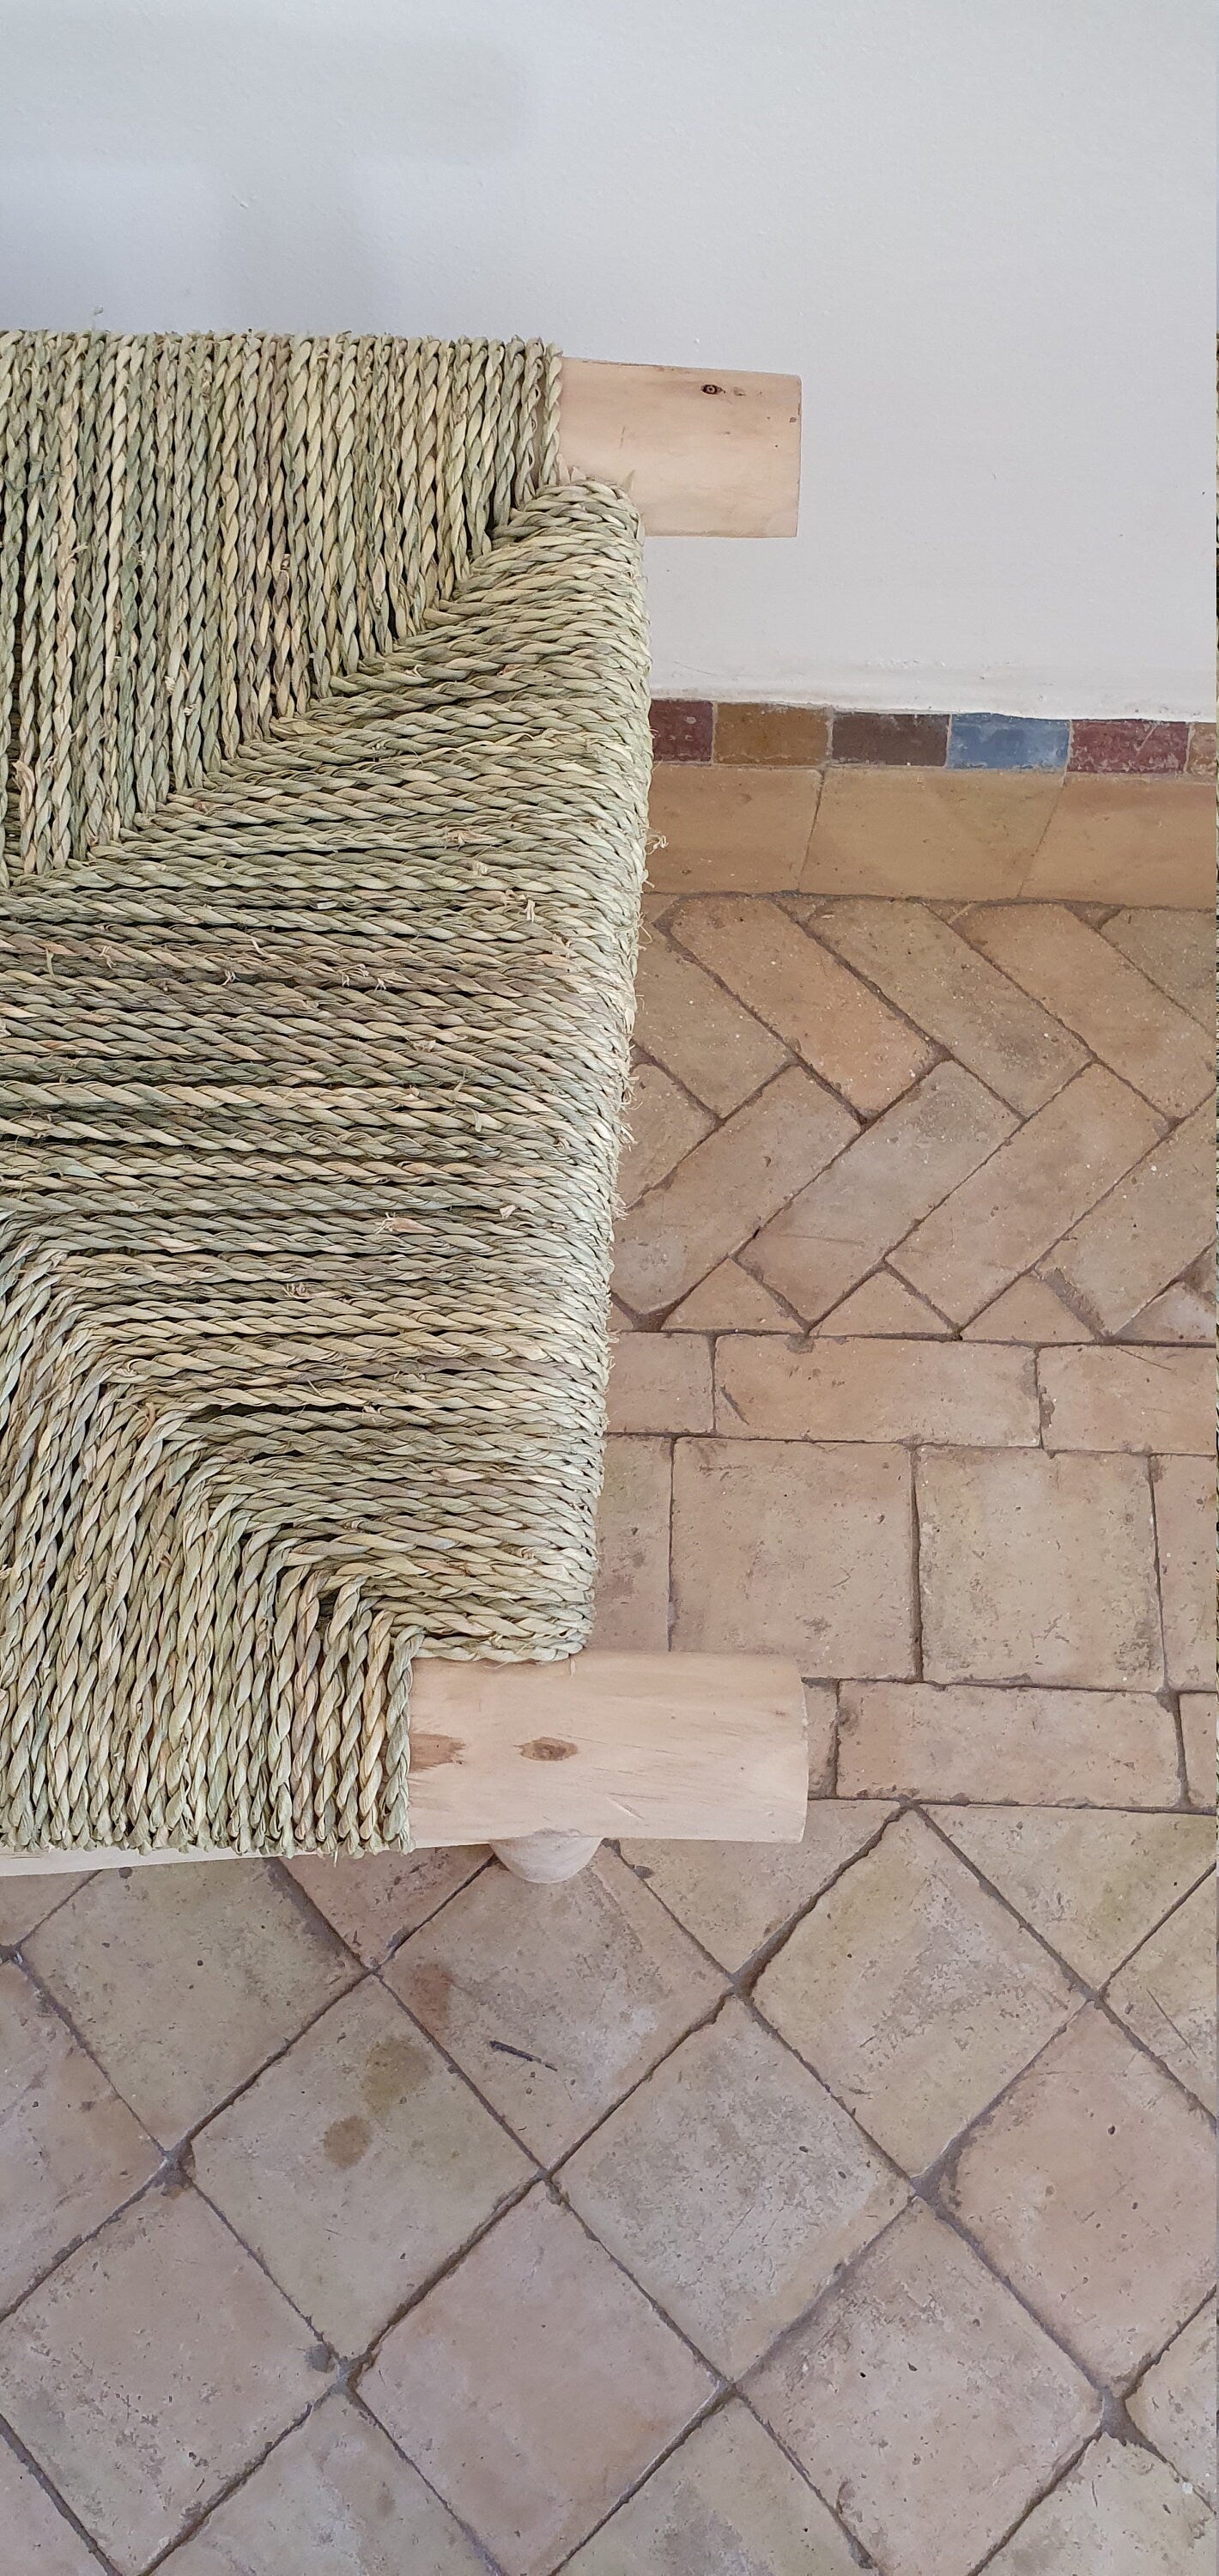 A woven wooden bench with Moroccan-inspired design